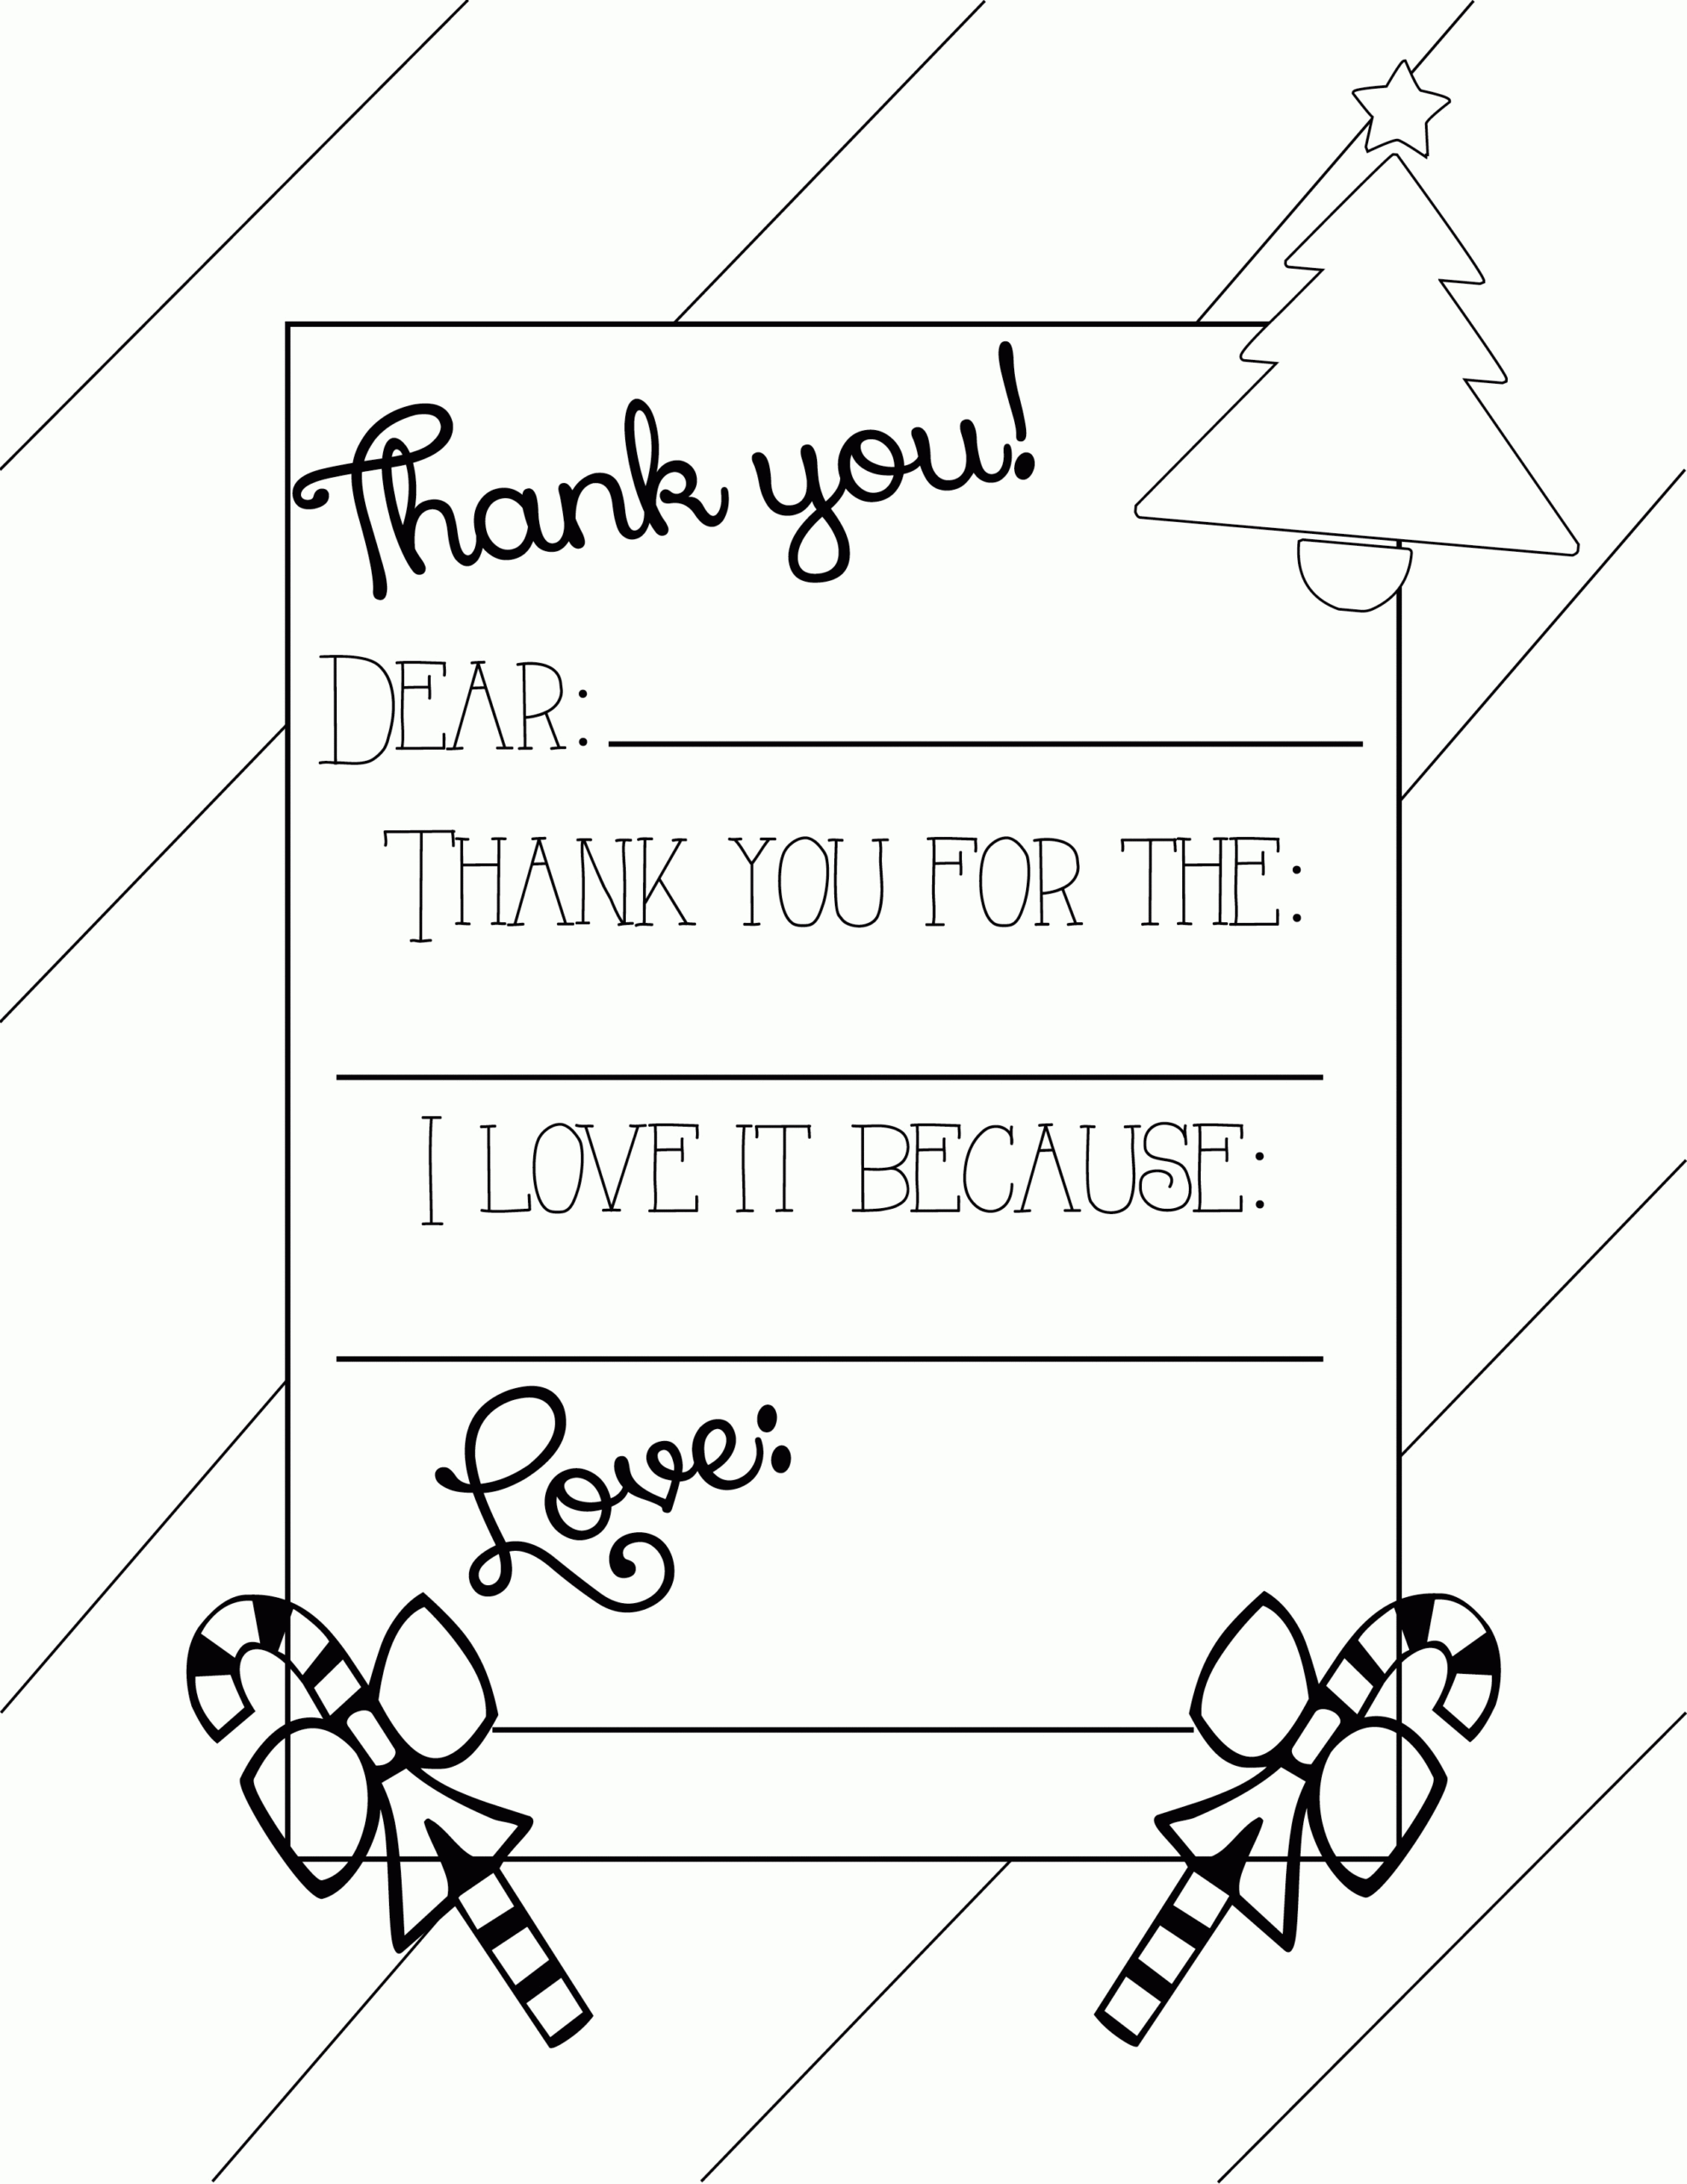 024 Il Fullxfull 1609214580 Tr7C Template Ideas Printable Within Christmas Thank You Card Templates Free